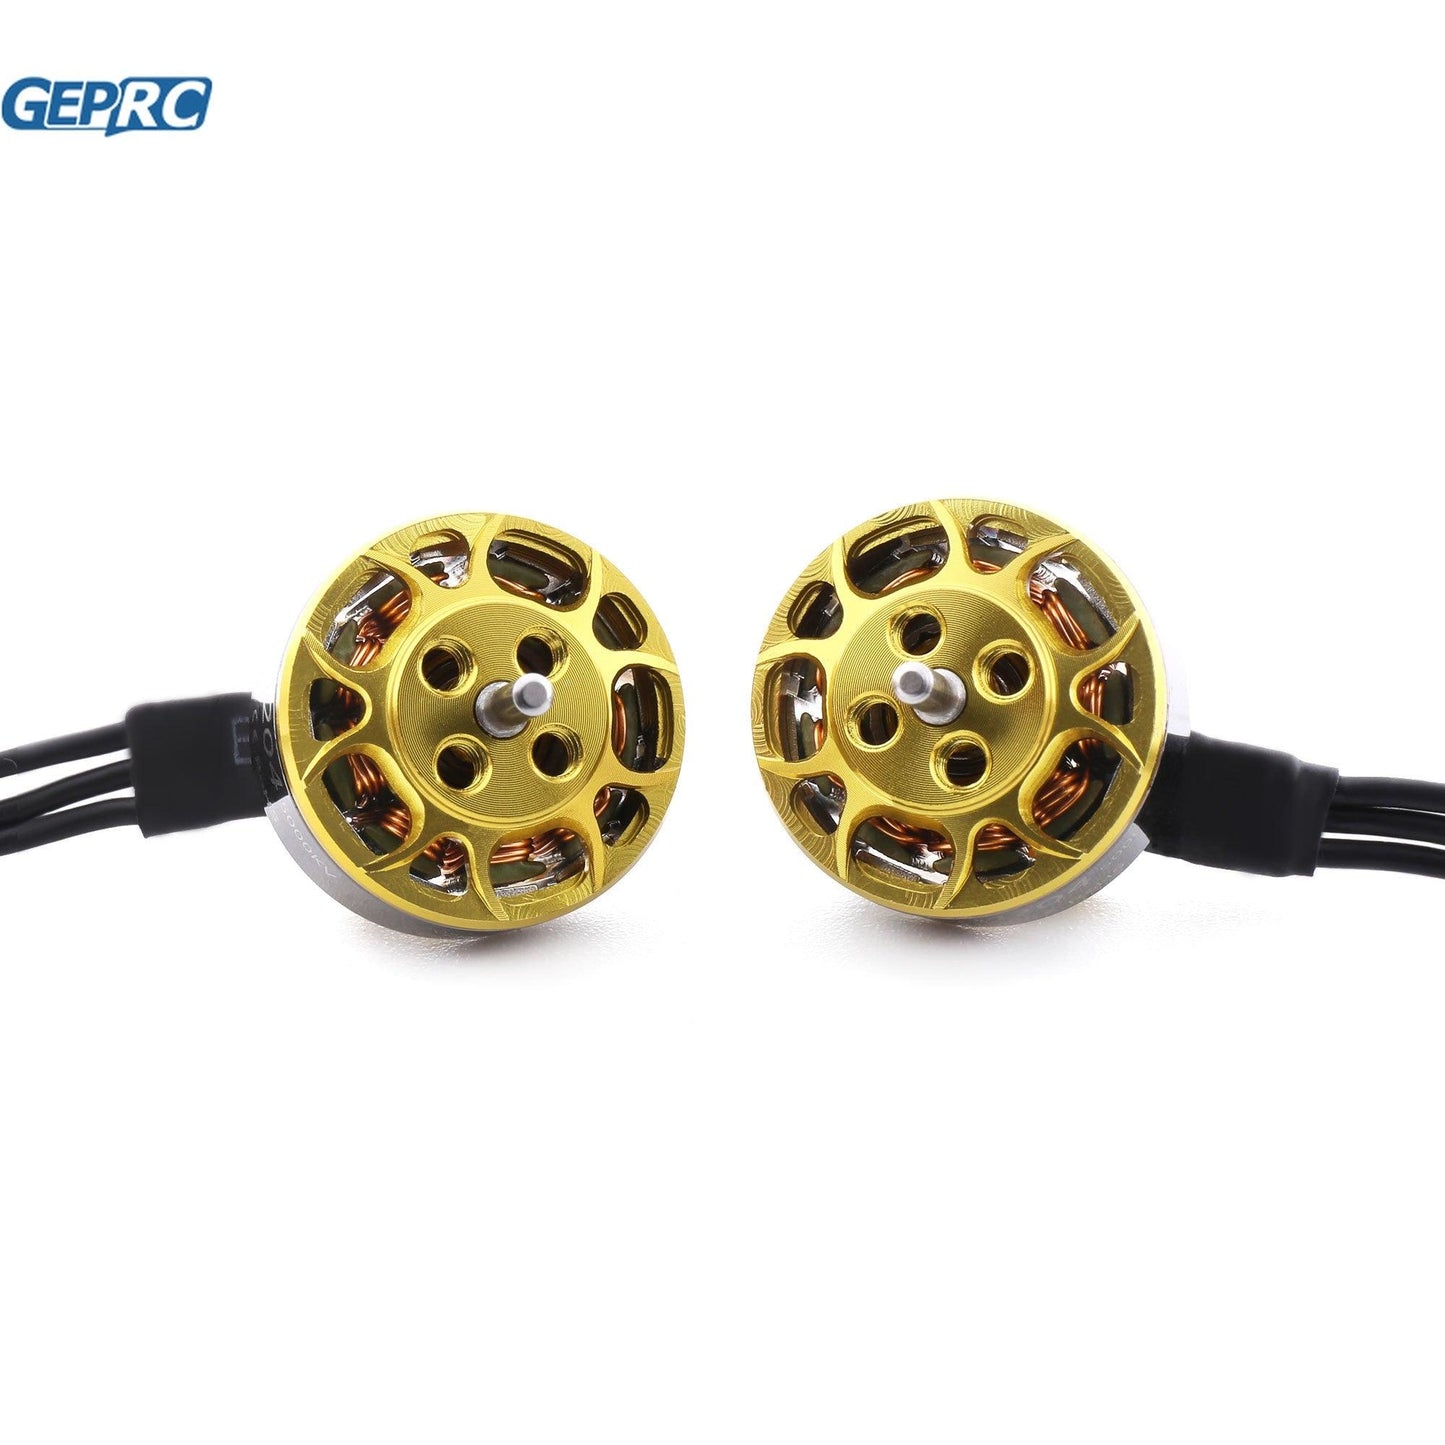 GEPRC GR1204 5000kv FPV Motors Brushless Motor for FPV RC Multicopter Racing Drone Parts DIY PARTS - RCDrone